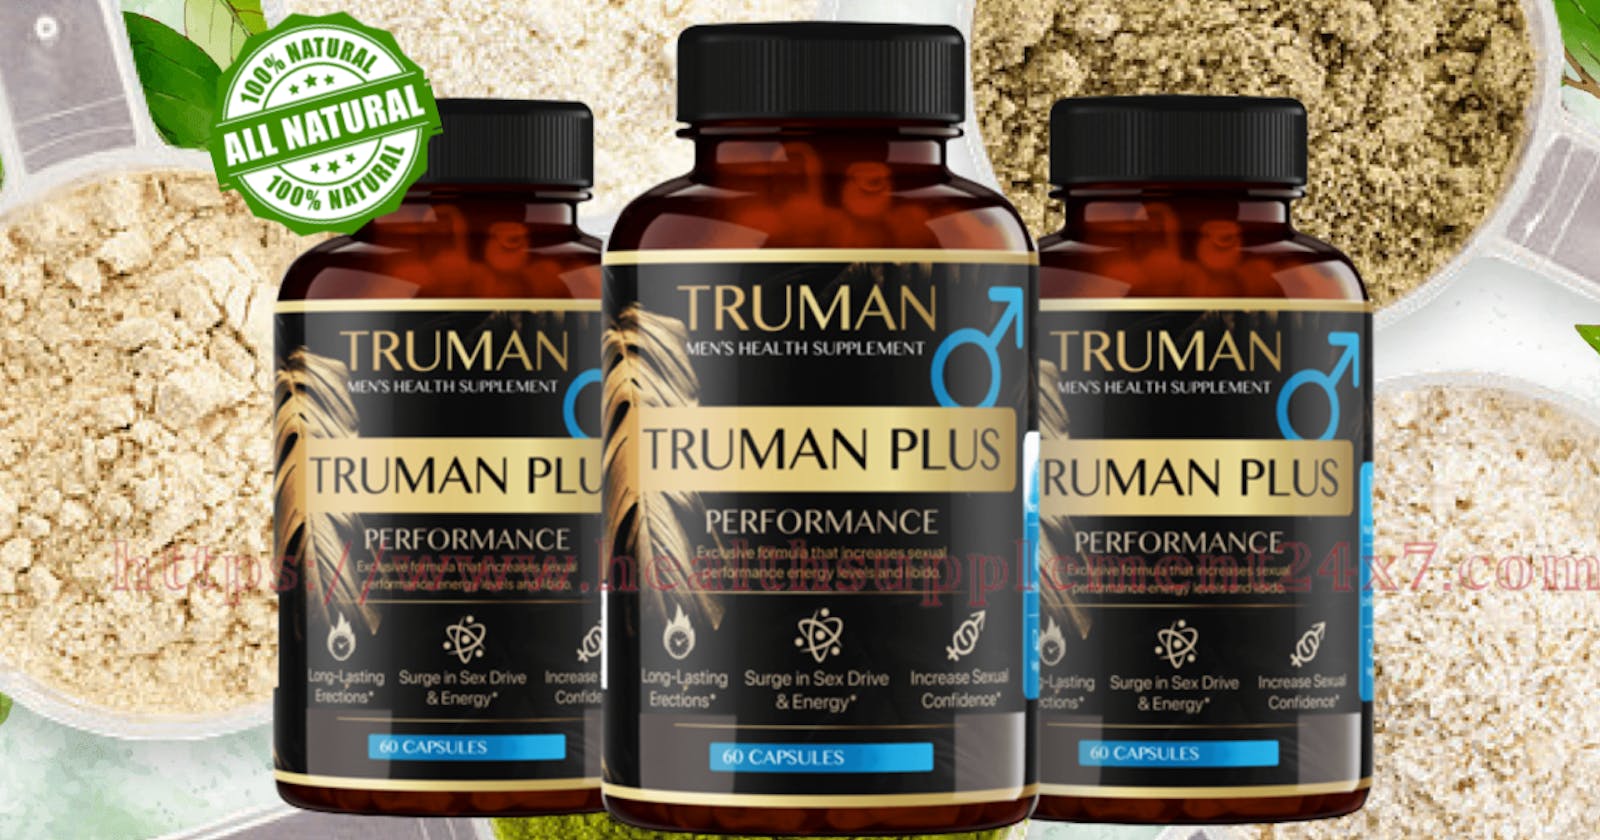 Truman CBD Male Enhancement Gummies Reviews Achieve Bigger & Harder Erections | Confidence Where To Buy(REAL OR HOAX)